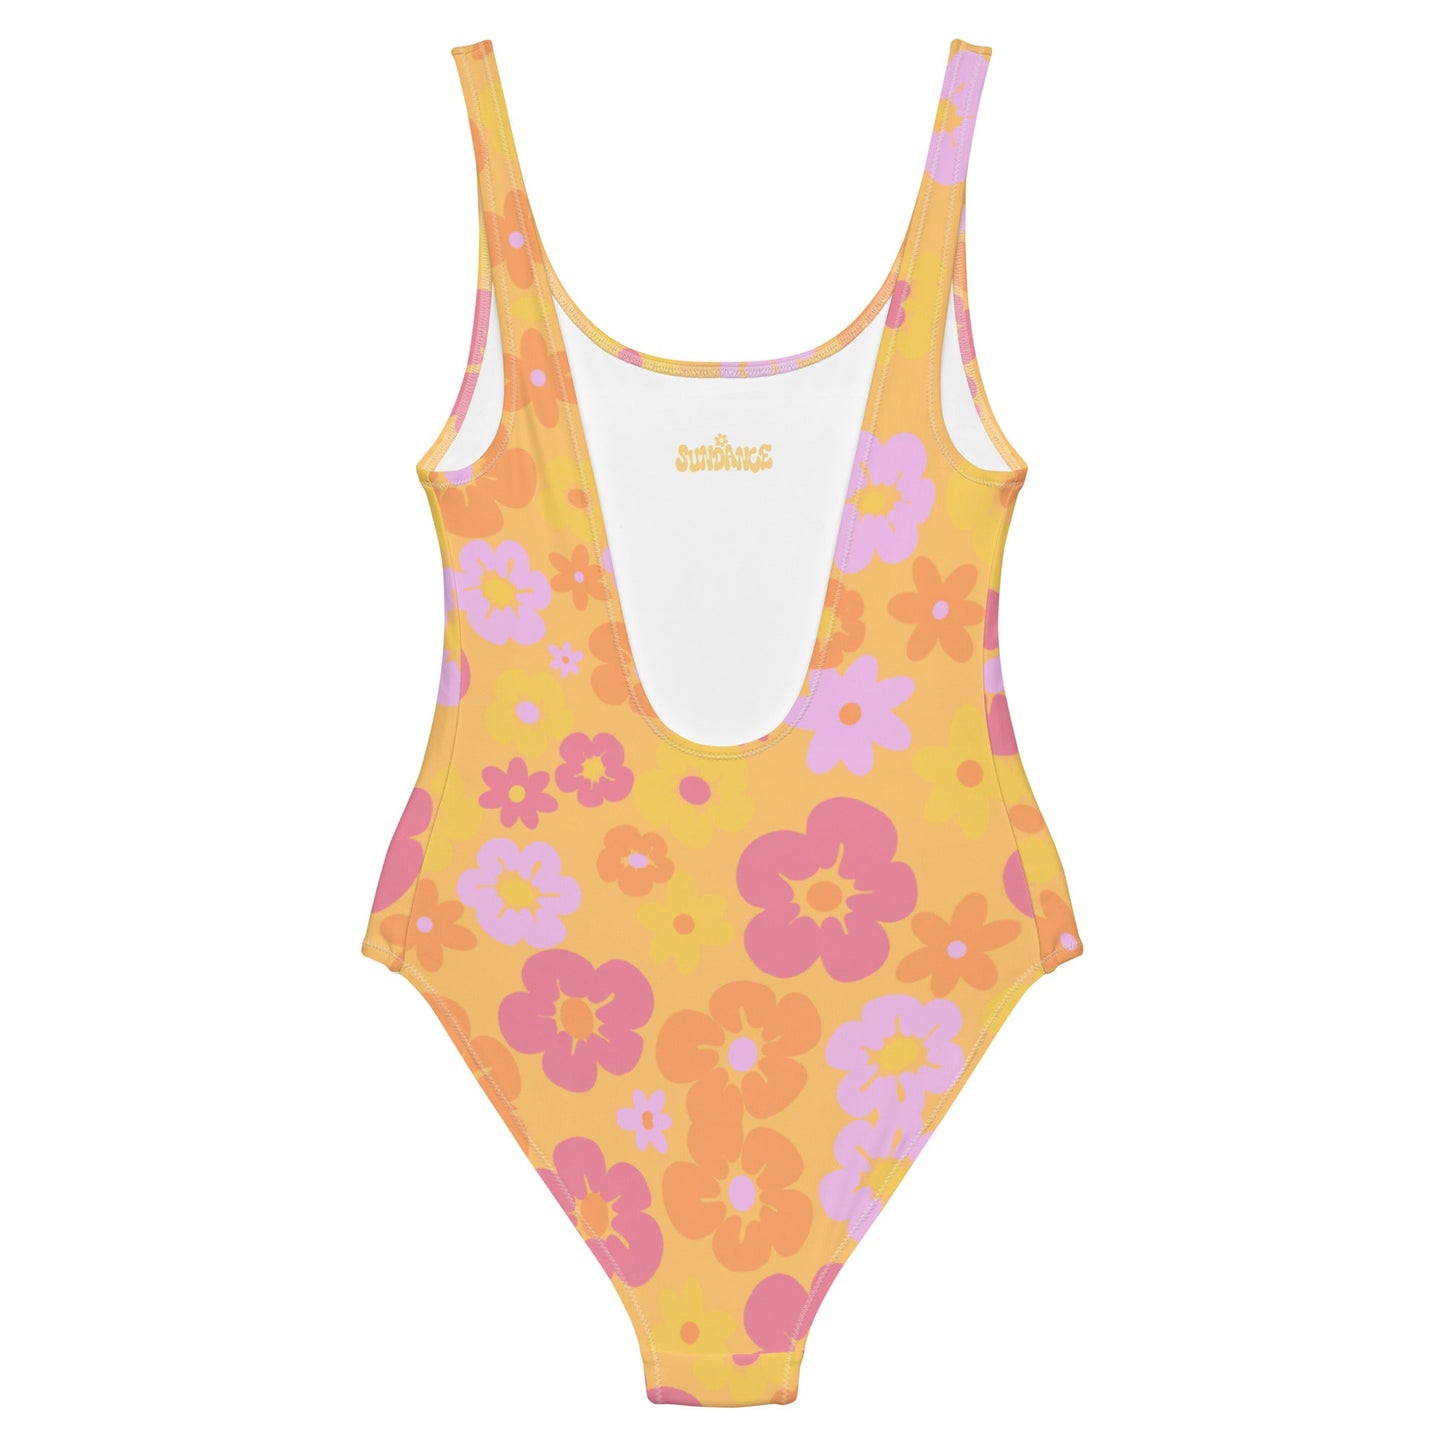 A Summers Daydream One Piece